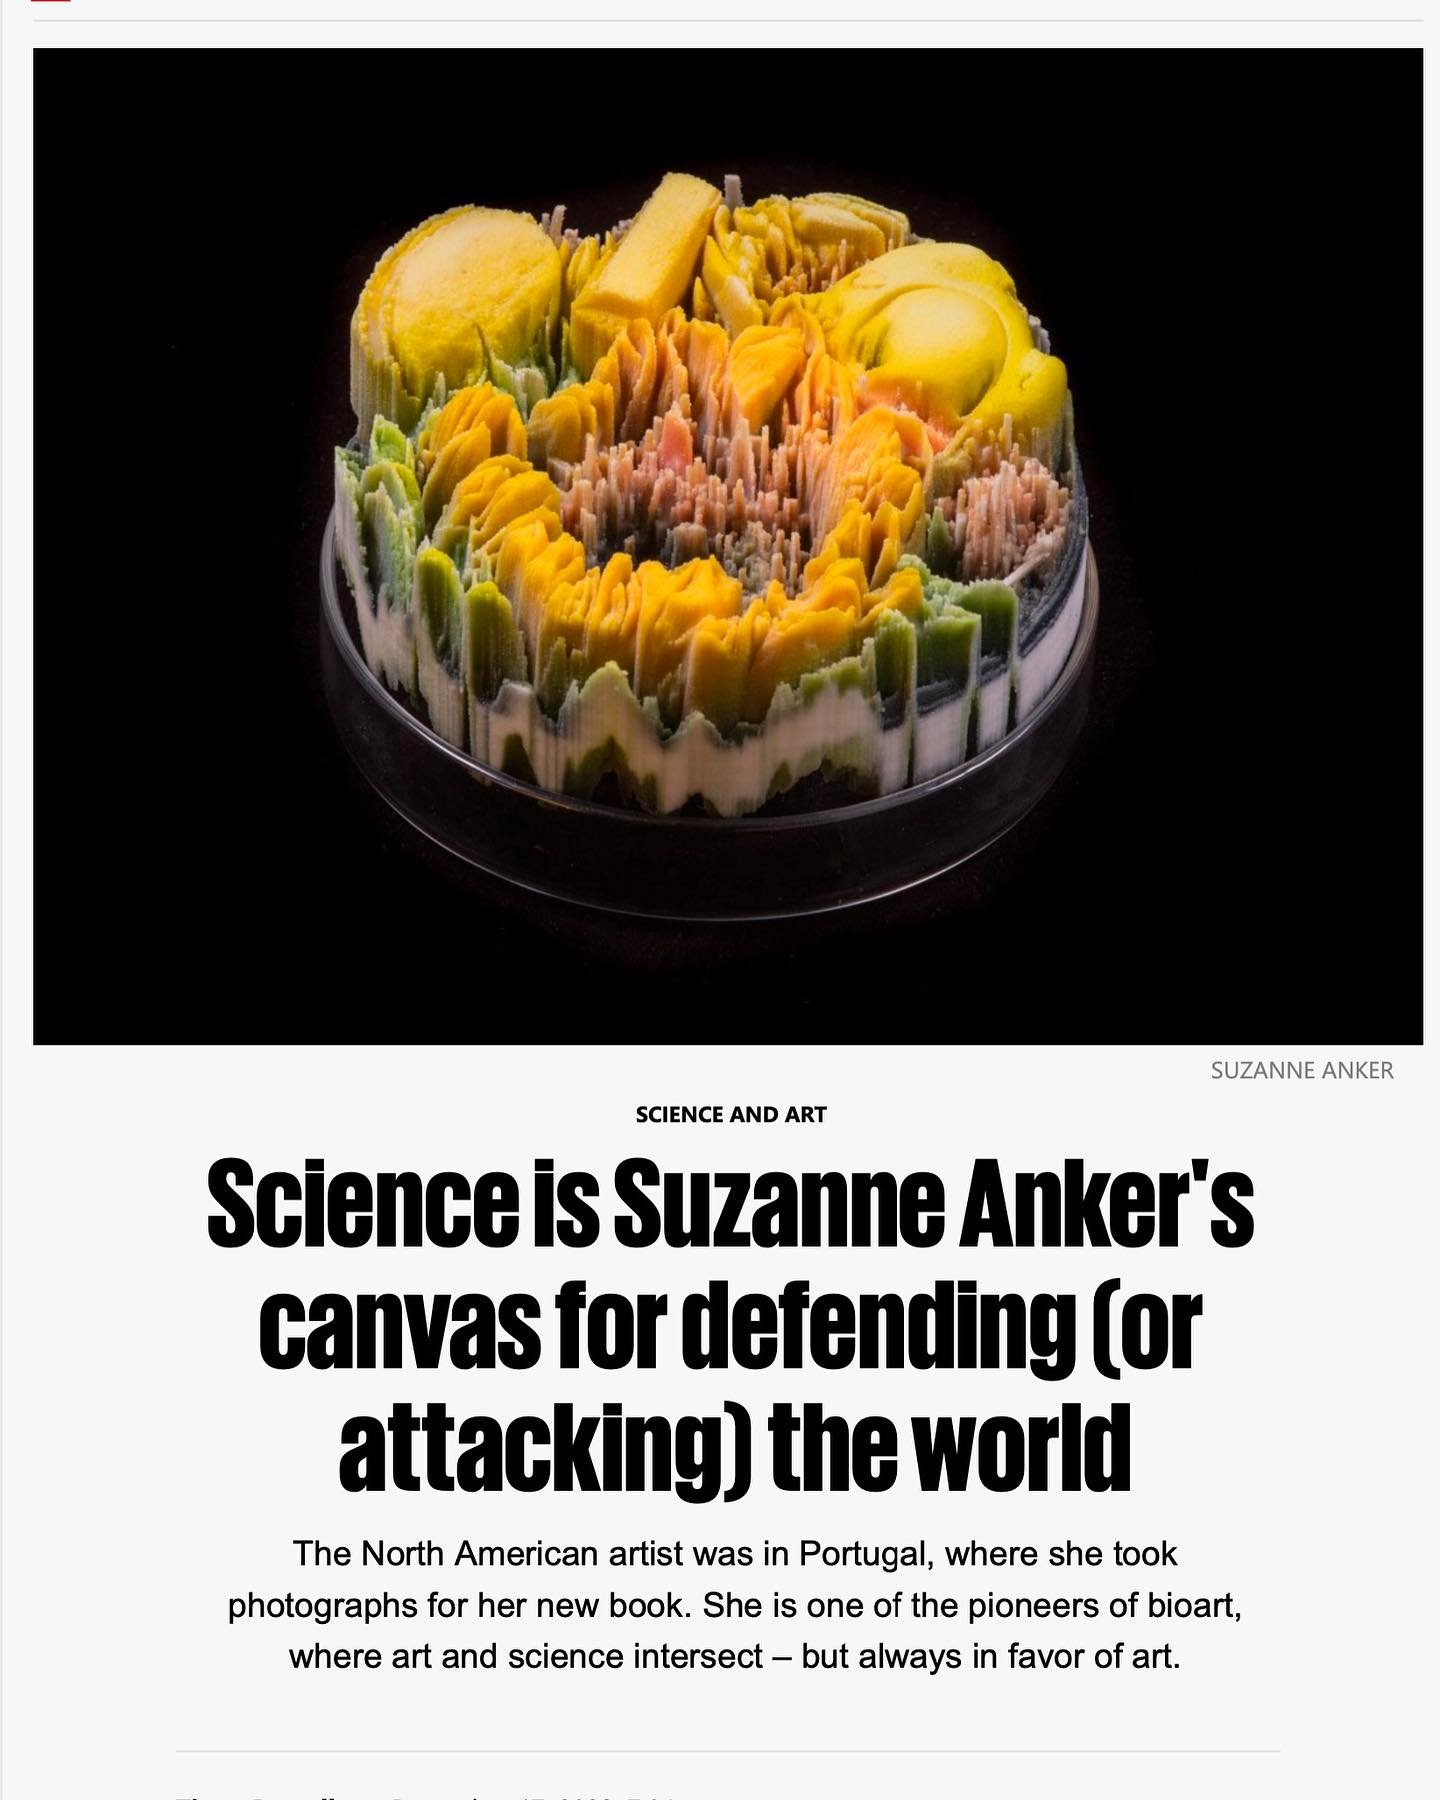 I was recently interviewed by @tiagomarquesramalho
for the Portuguese newspaper @publico.pt To read the full article, visit my web site at suzanneanker.com

#suzanneanker #bioart #sciart #artsci #natureandculture #artandtechnology #artandecology #env